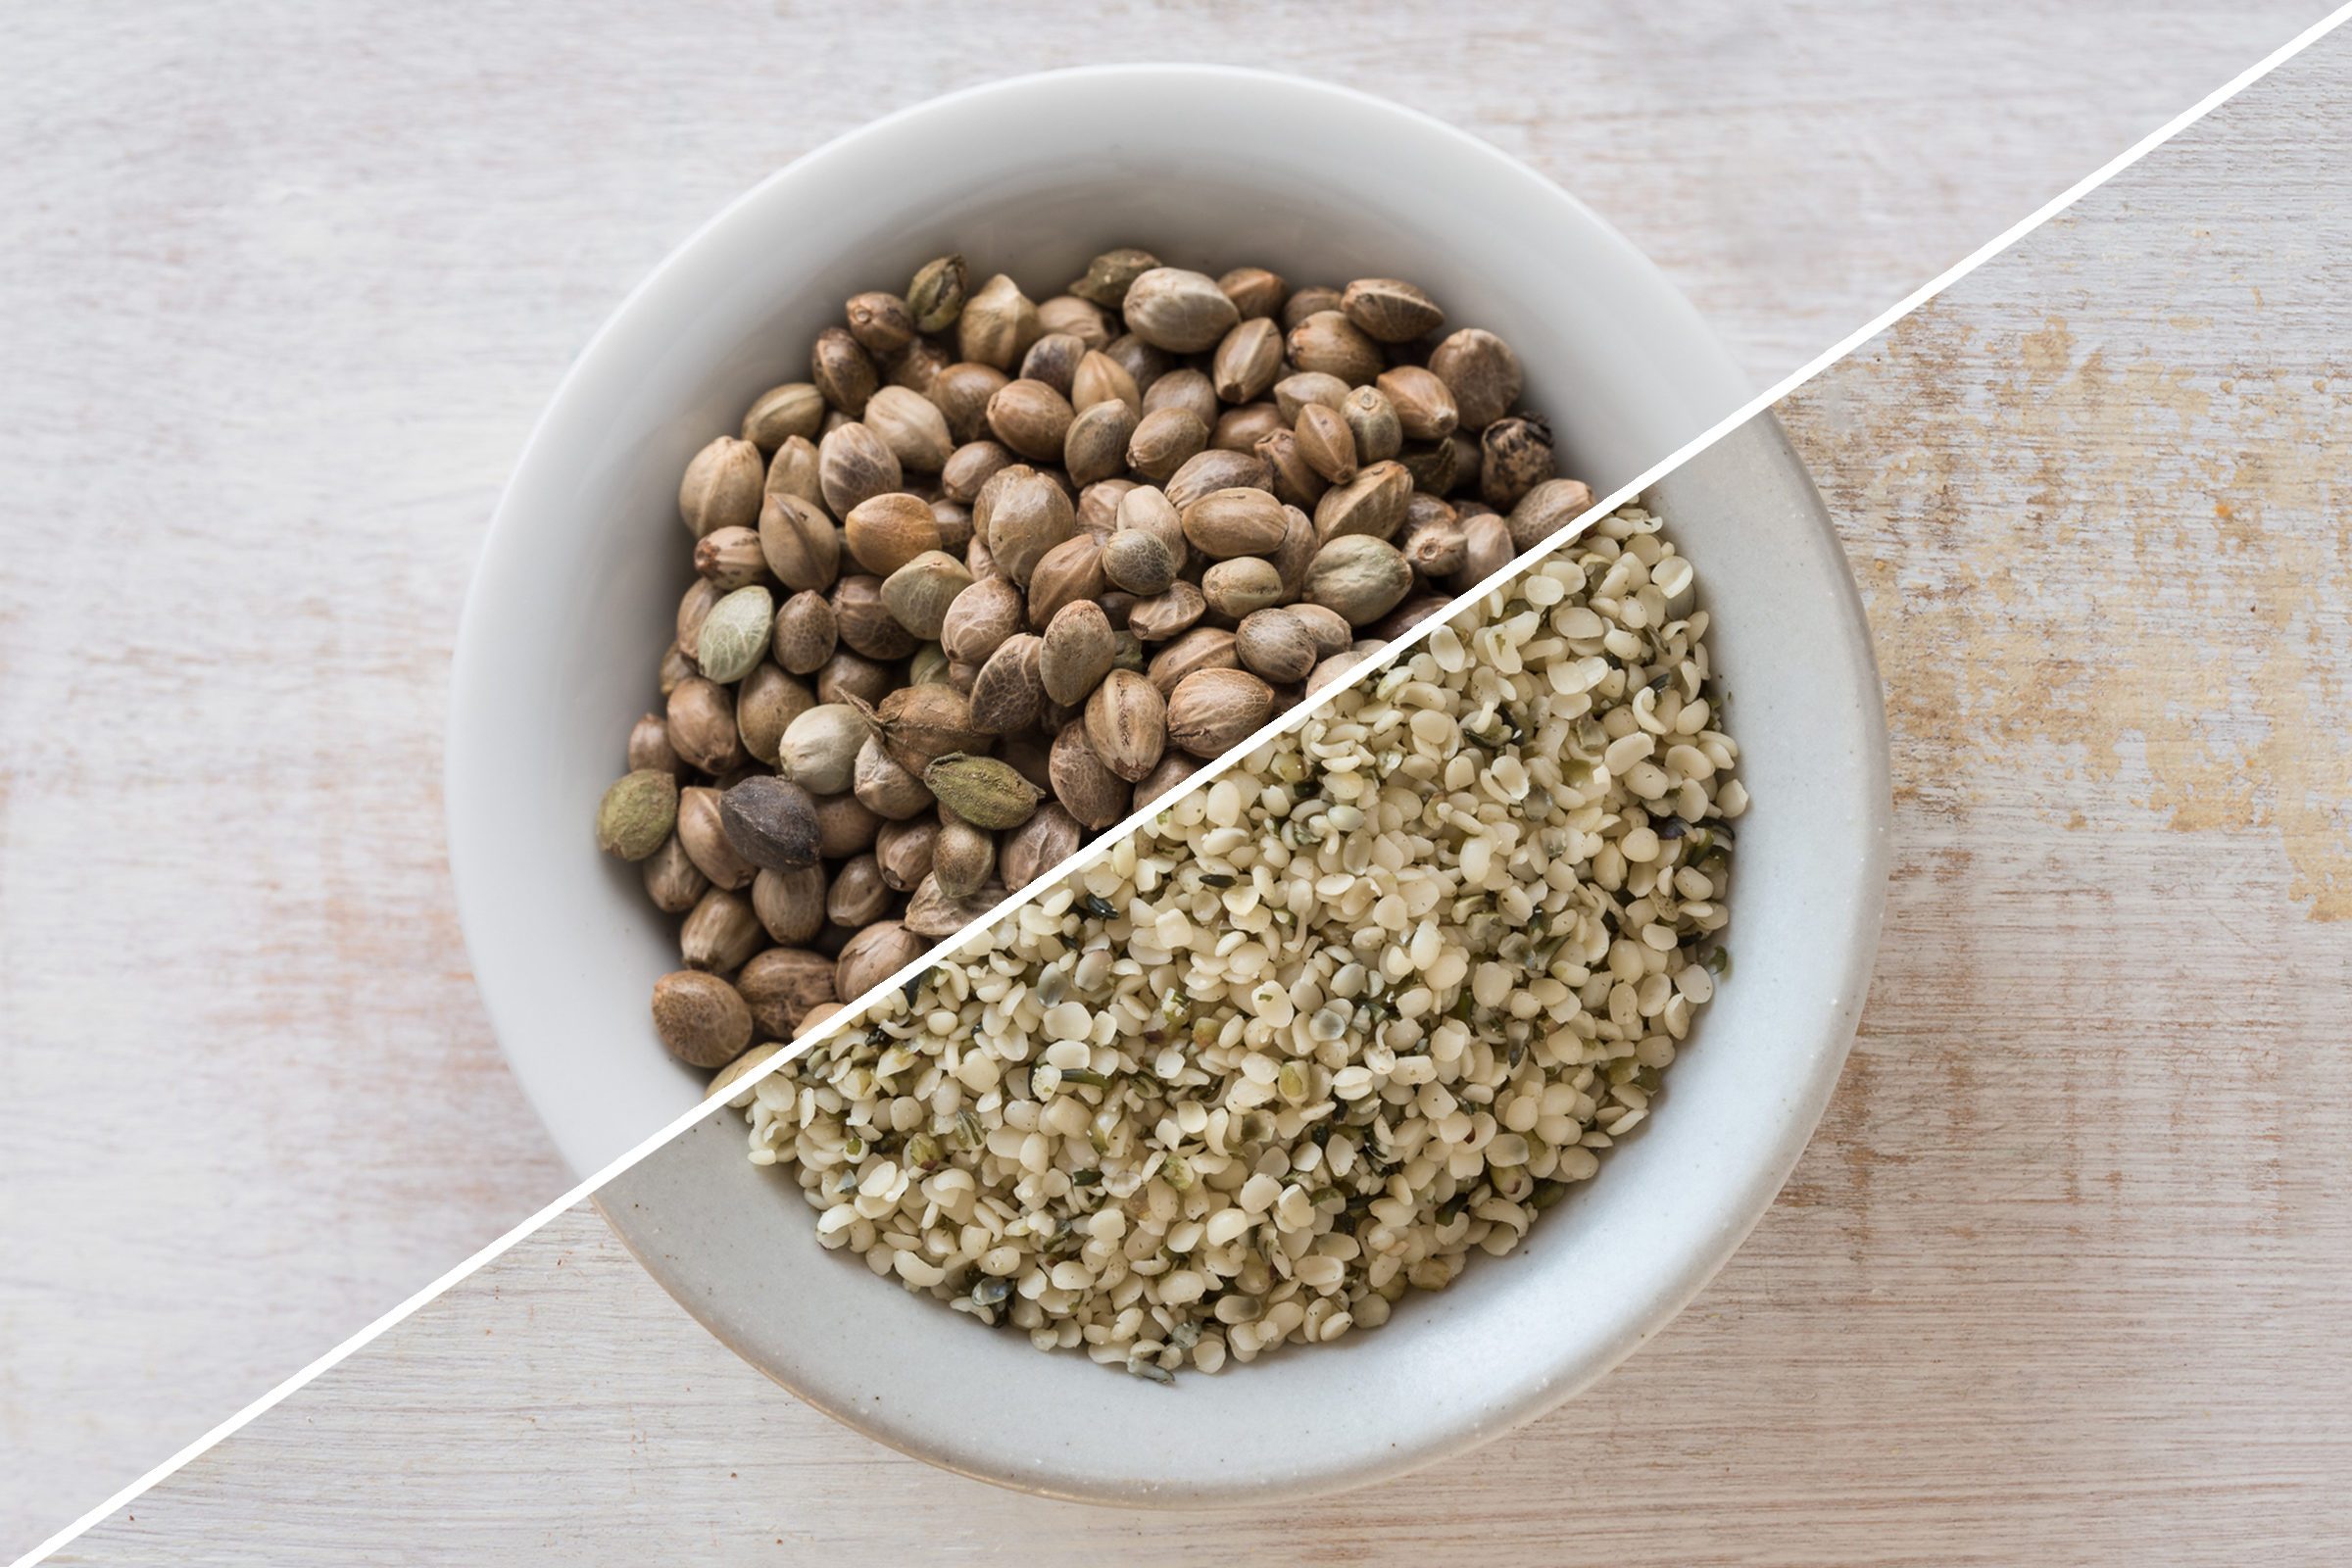 Hemp Hearts vs. Hemp Seeds: What's the Difference?